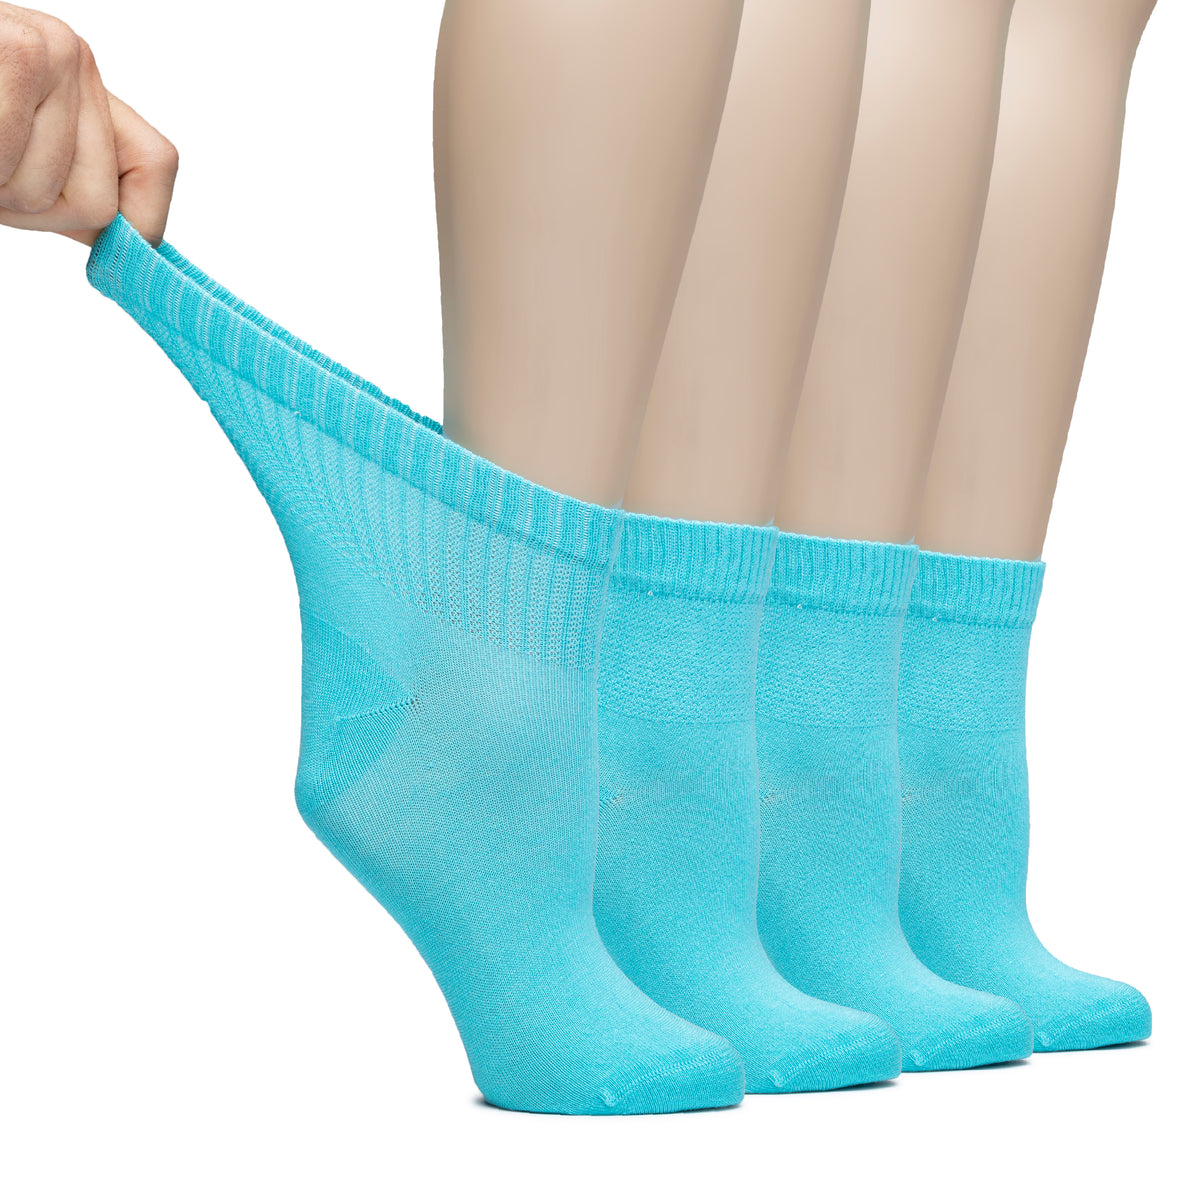 The image depicts a pair of Diabetic Bamboo Ankle Socks in blue, worn by a woman whose feet are visible.